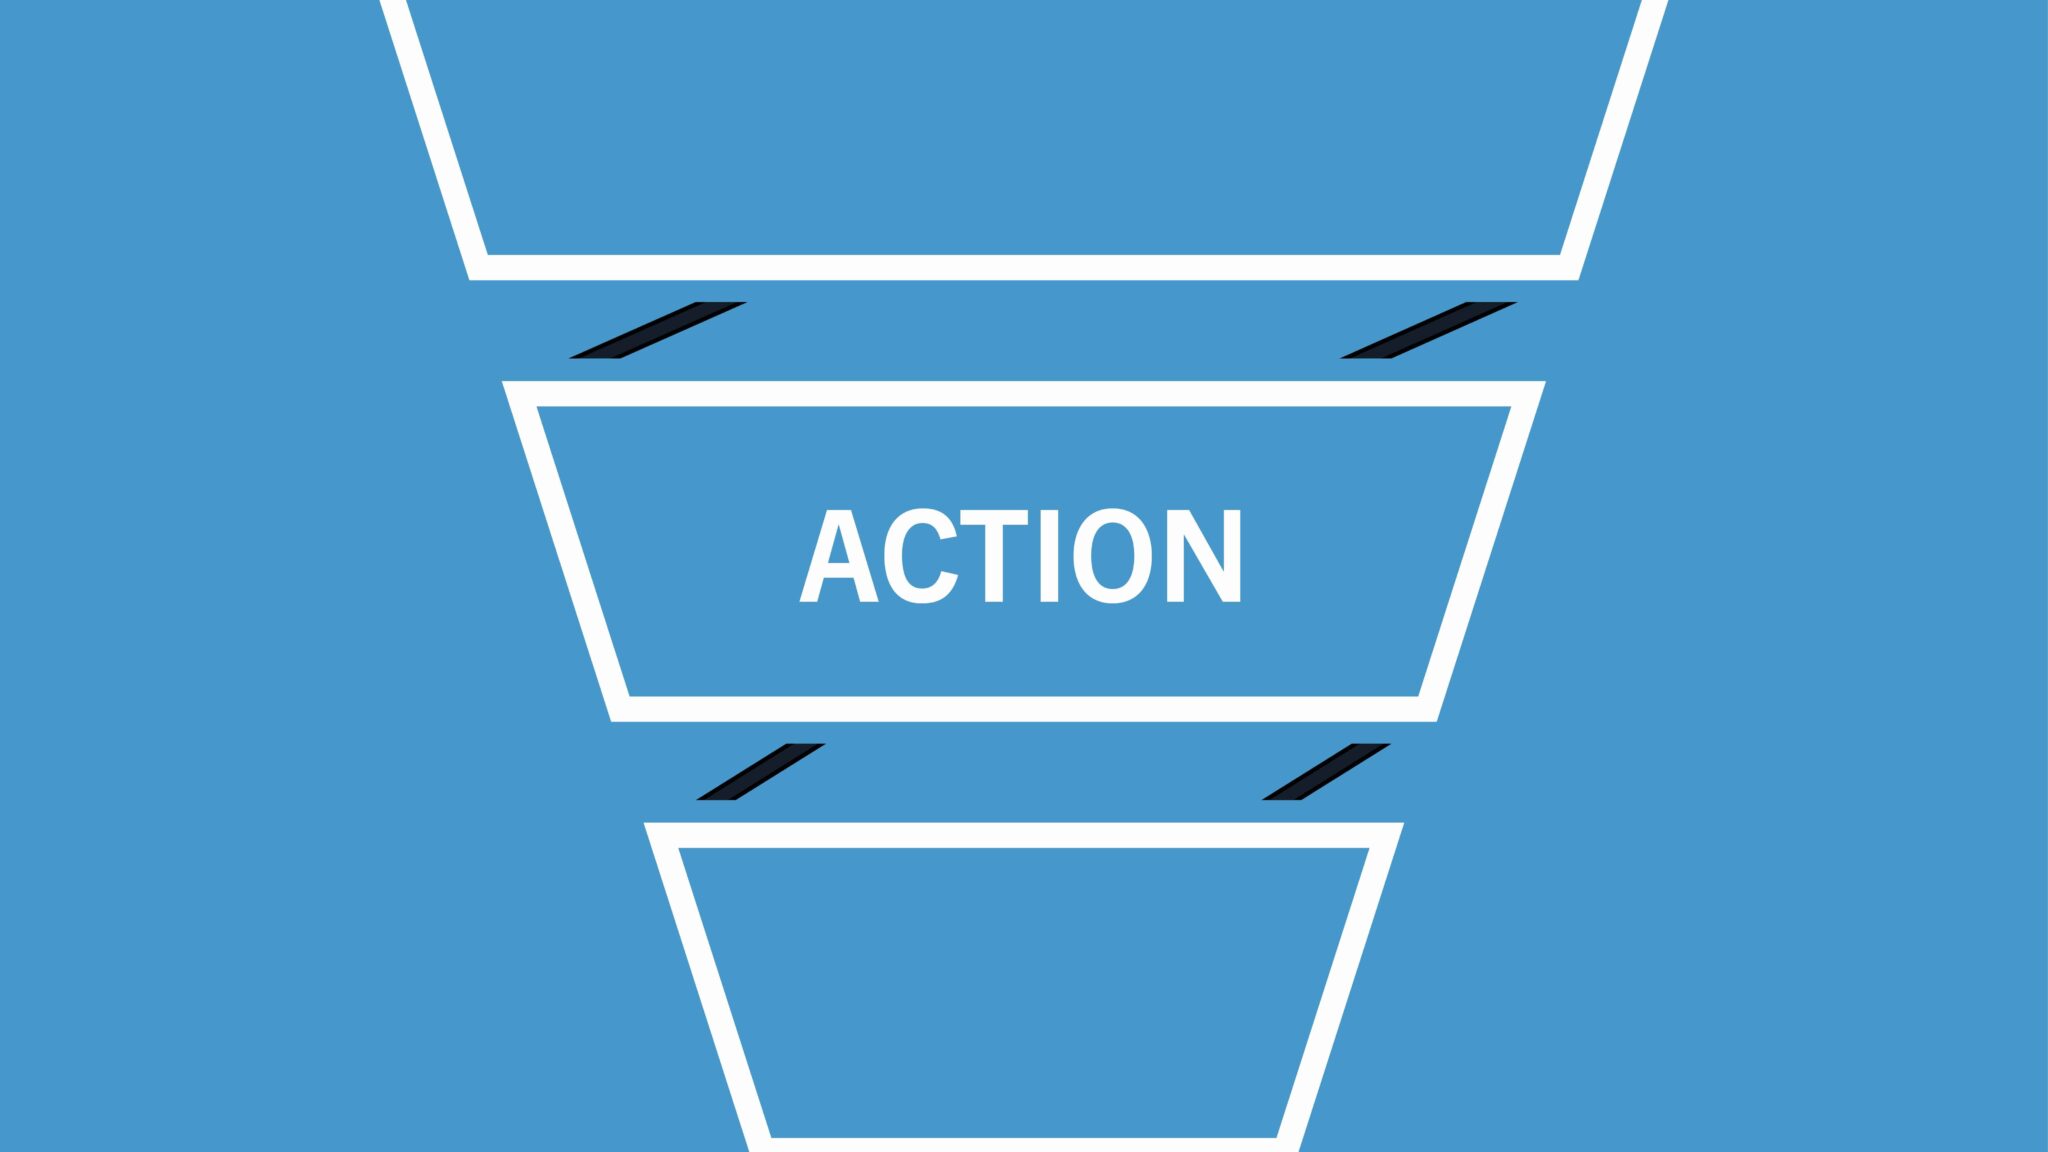 action phase of the marketing funnel